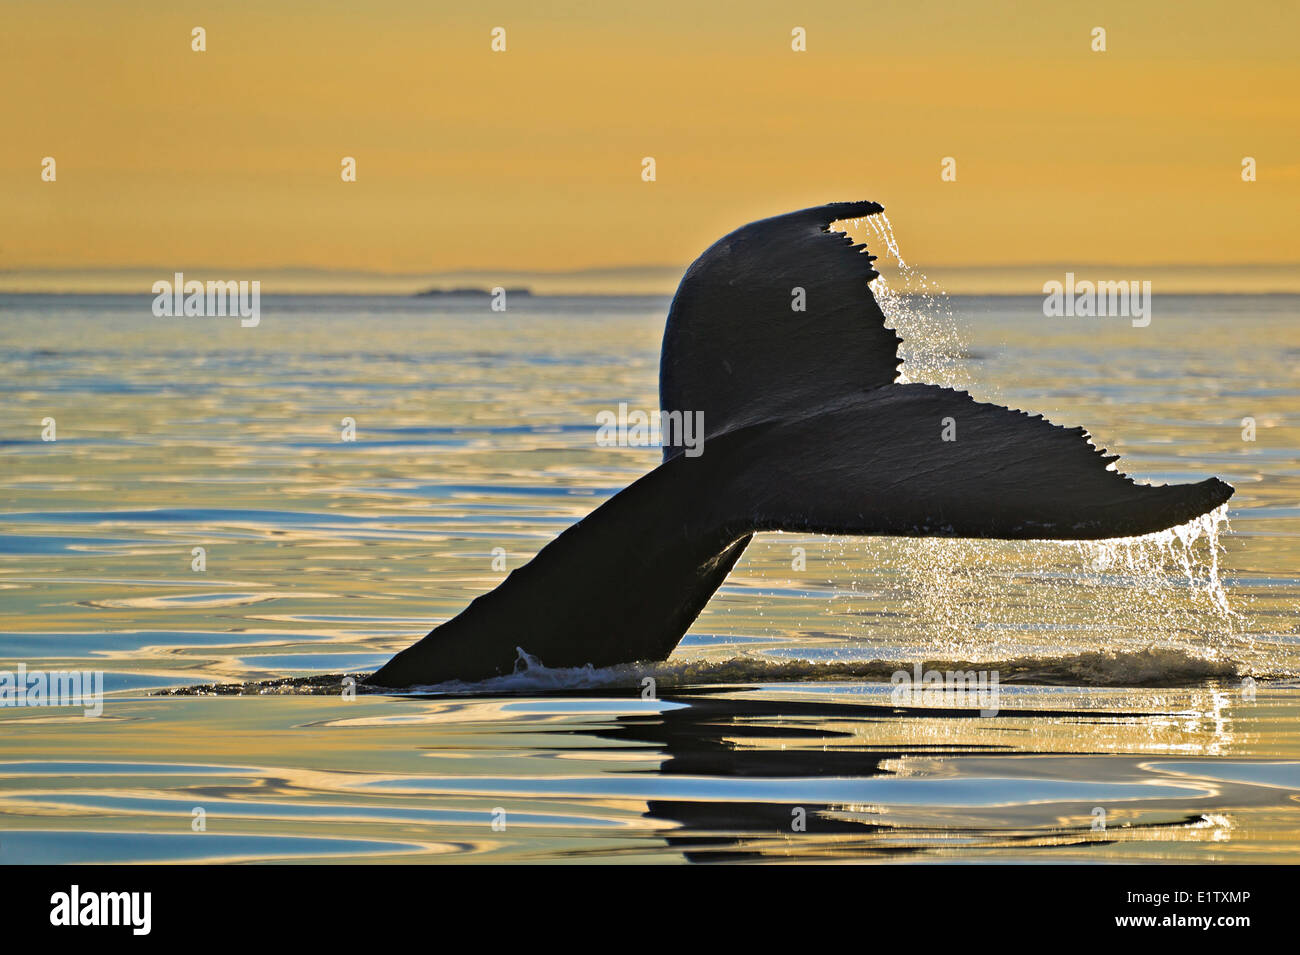 Diving Humpback Whale Megaptera novaeangliae shows its fluke during a golden sunset above the Strait Belle Newfoundland Stock Photo